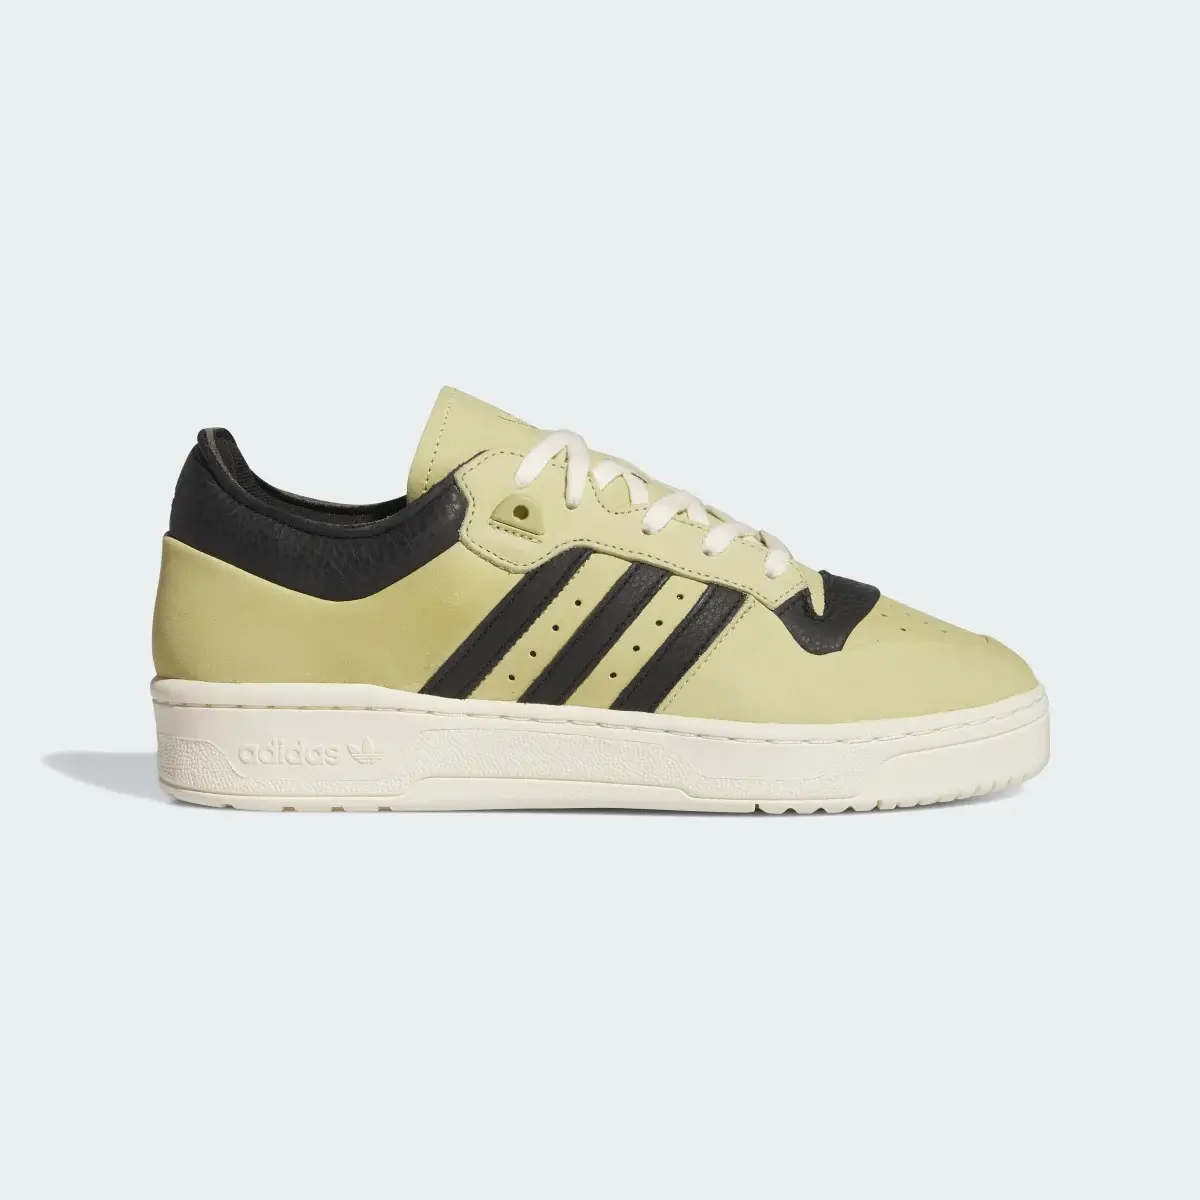 Adidas Rivalry 86 Low 001 Shoes. 2